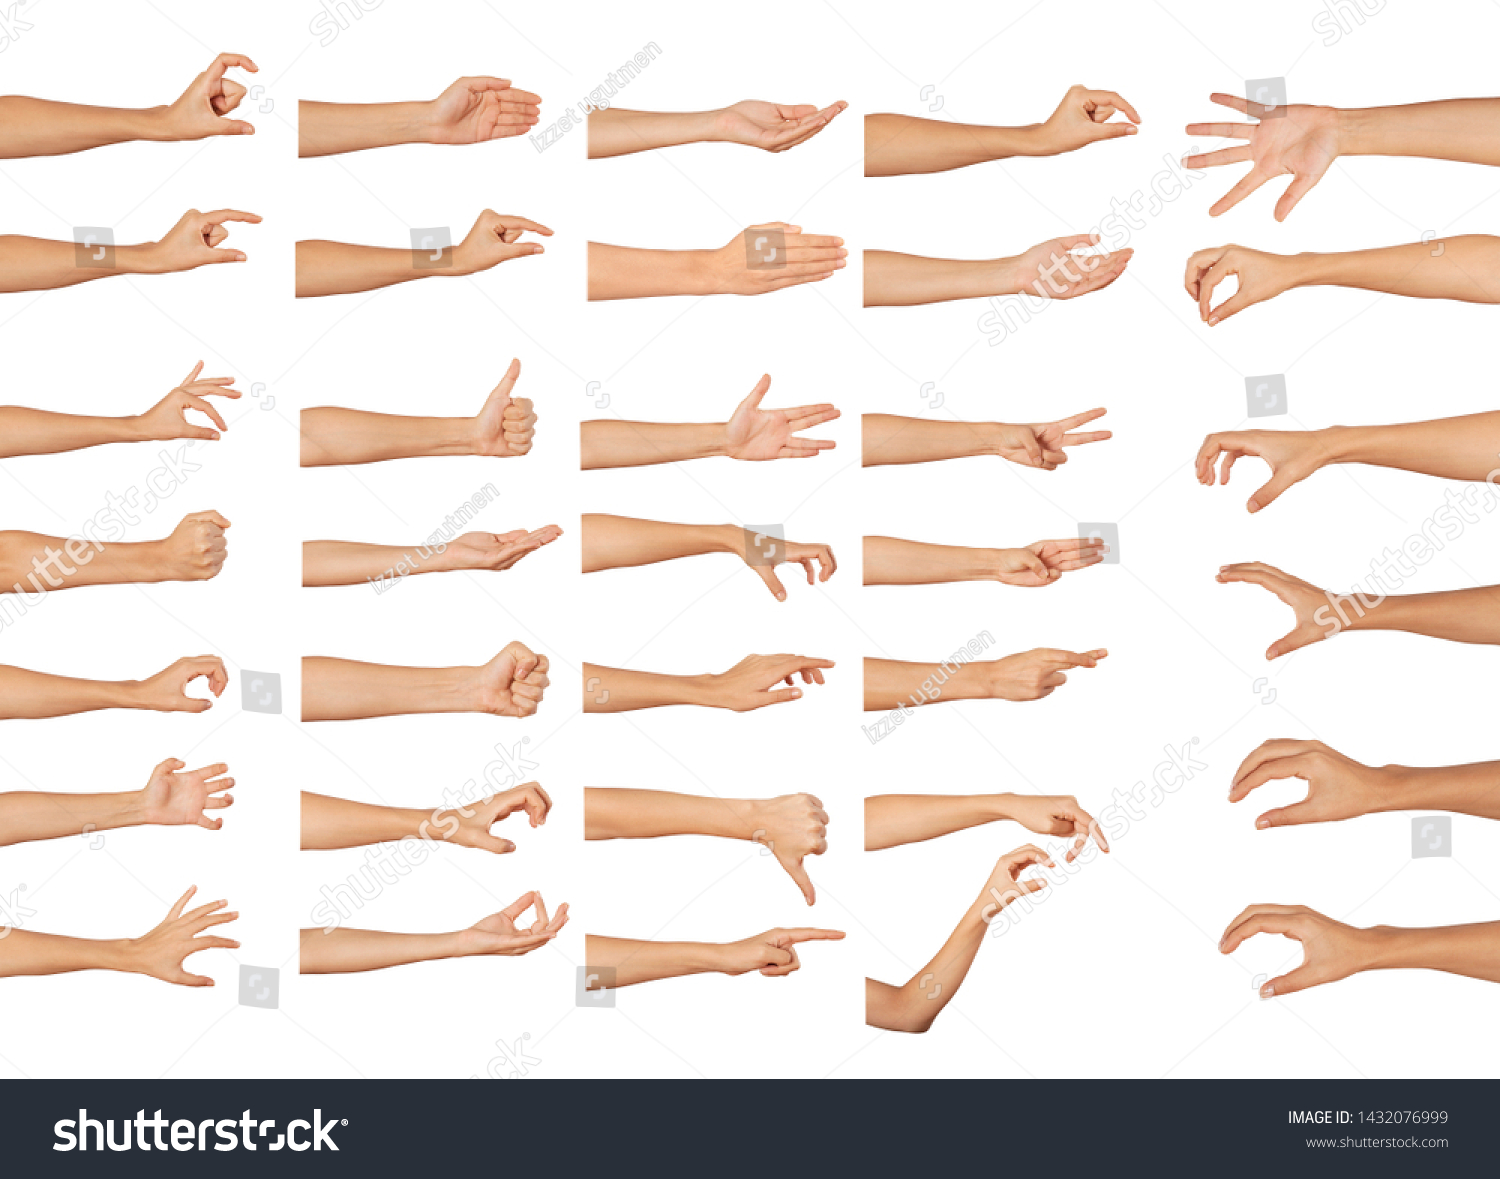 Set of woman's hand measuring invisible items #1432076999